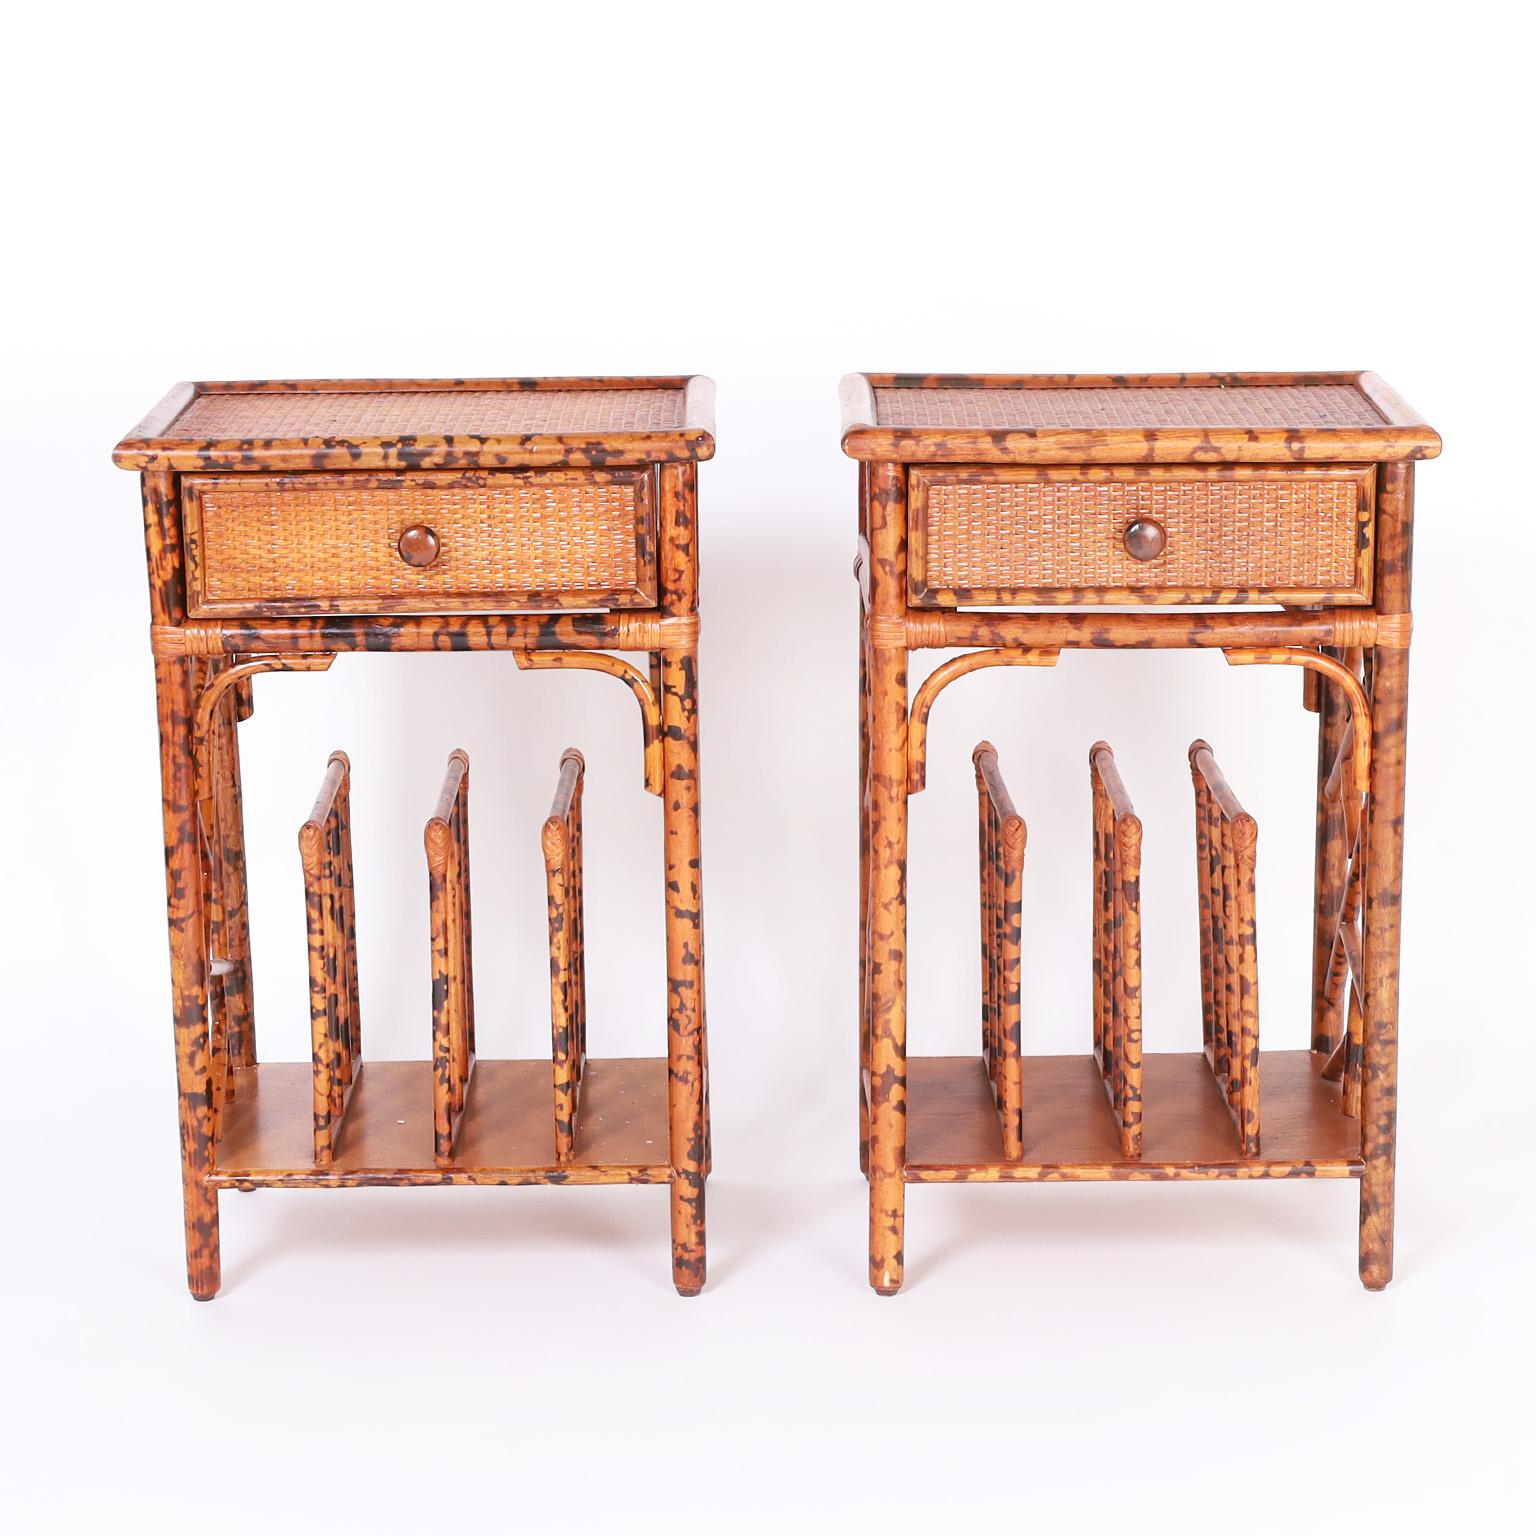 Unusual pair of British colonial style stands featuring faux bamboo frames with a faux tortoise finish, grasscloth panels, one drawer that swings both ways, Chinese chippendale sides and bases with magazine racks.